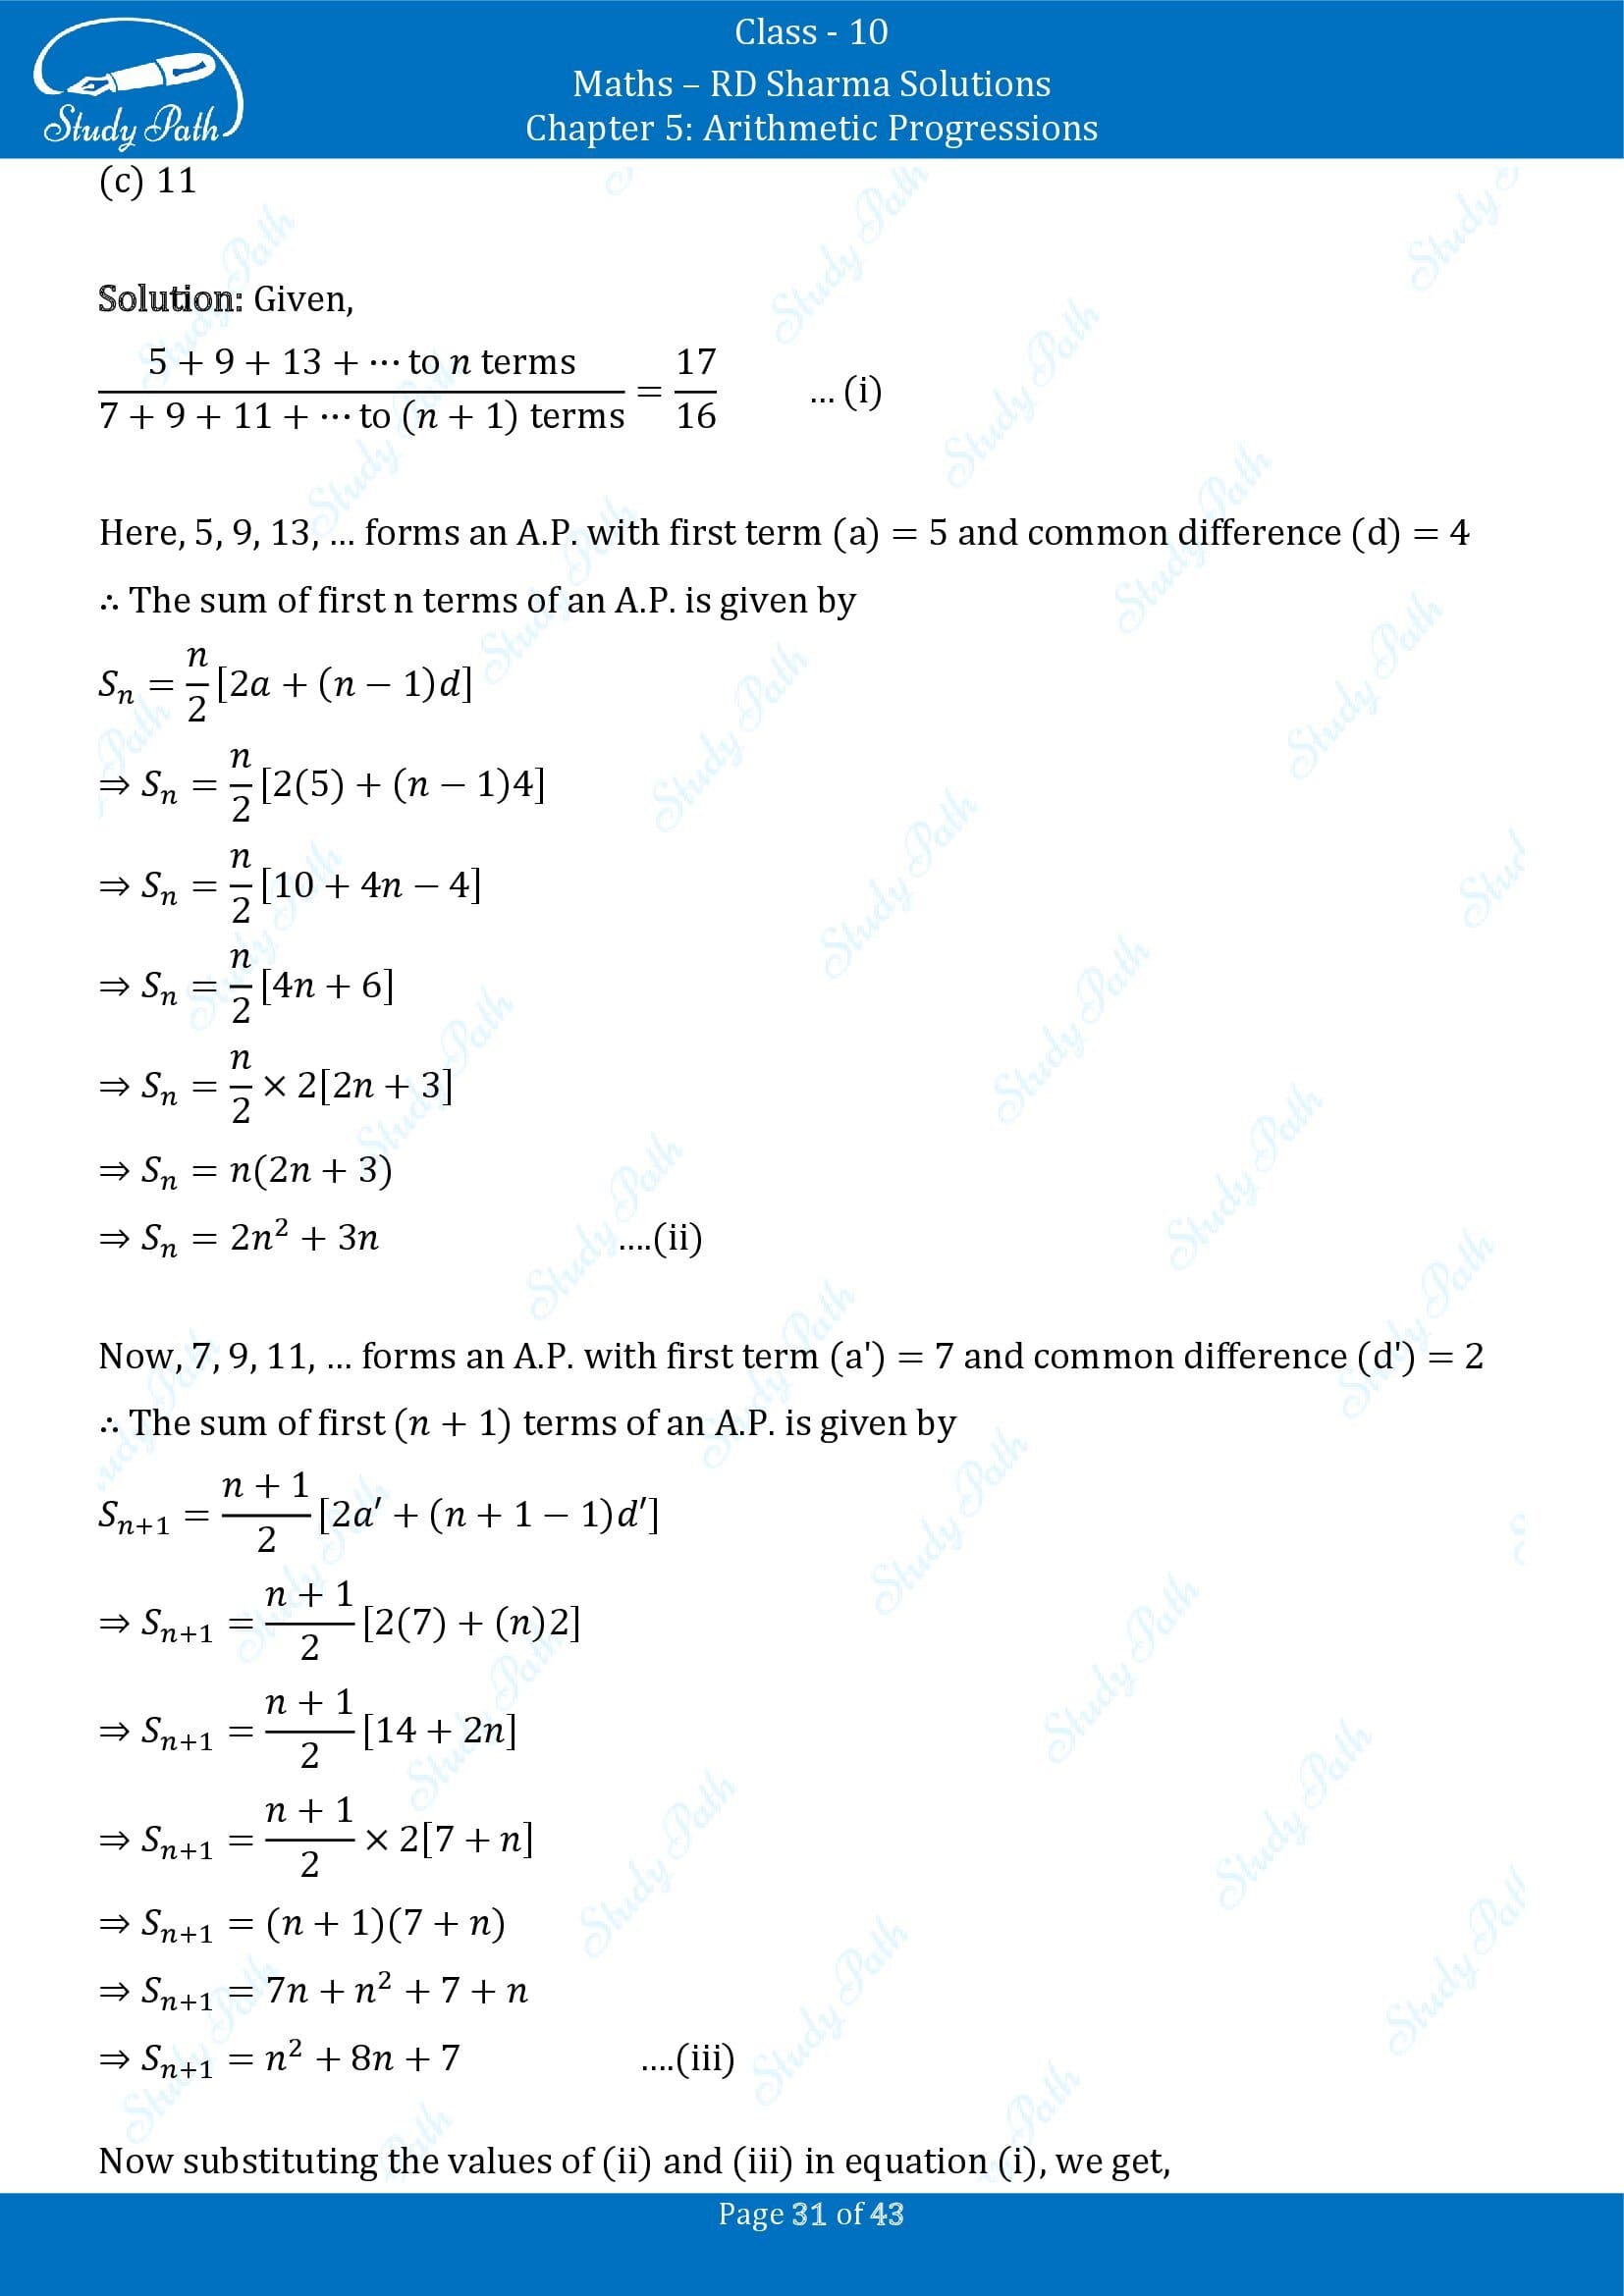 RD Sharma Solutions Class 10 Chapter 5 Arithmetic Progressions Multiple Choice Question MCQs 00031